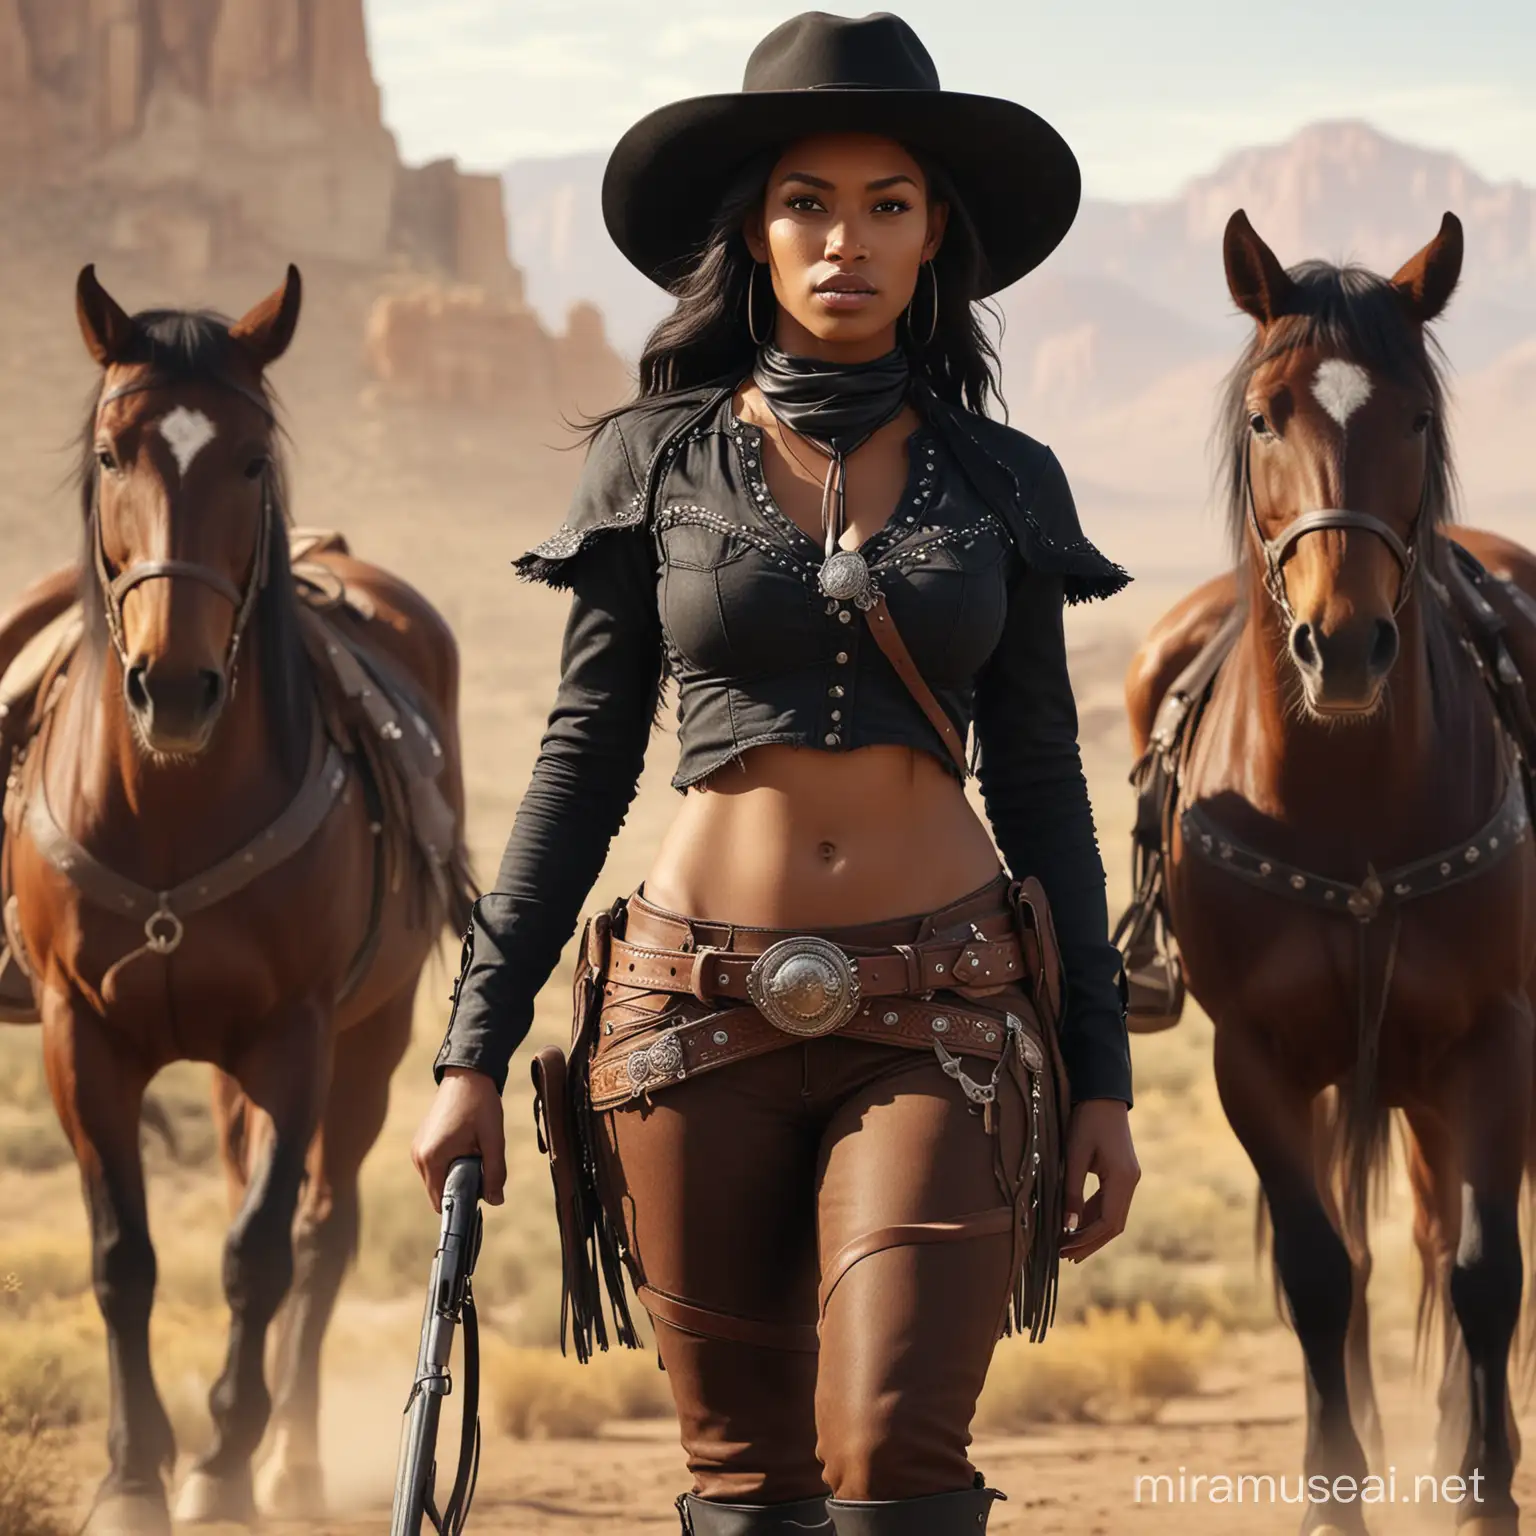 Stunning Black Cowgirl Leading Horses in Detailed Cowboy Art Portrait